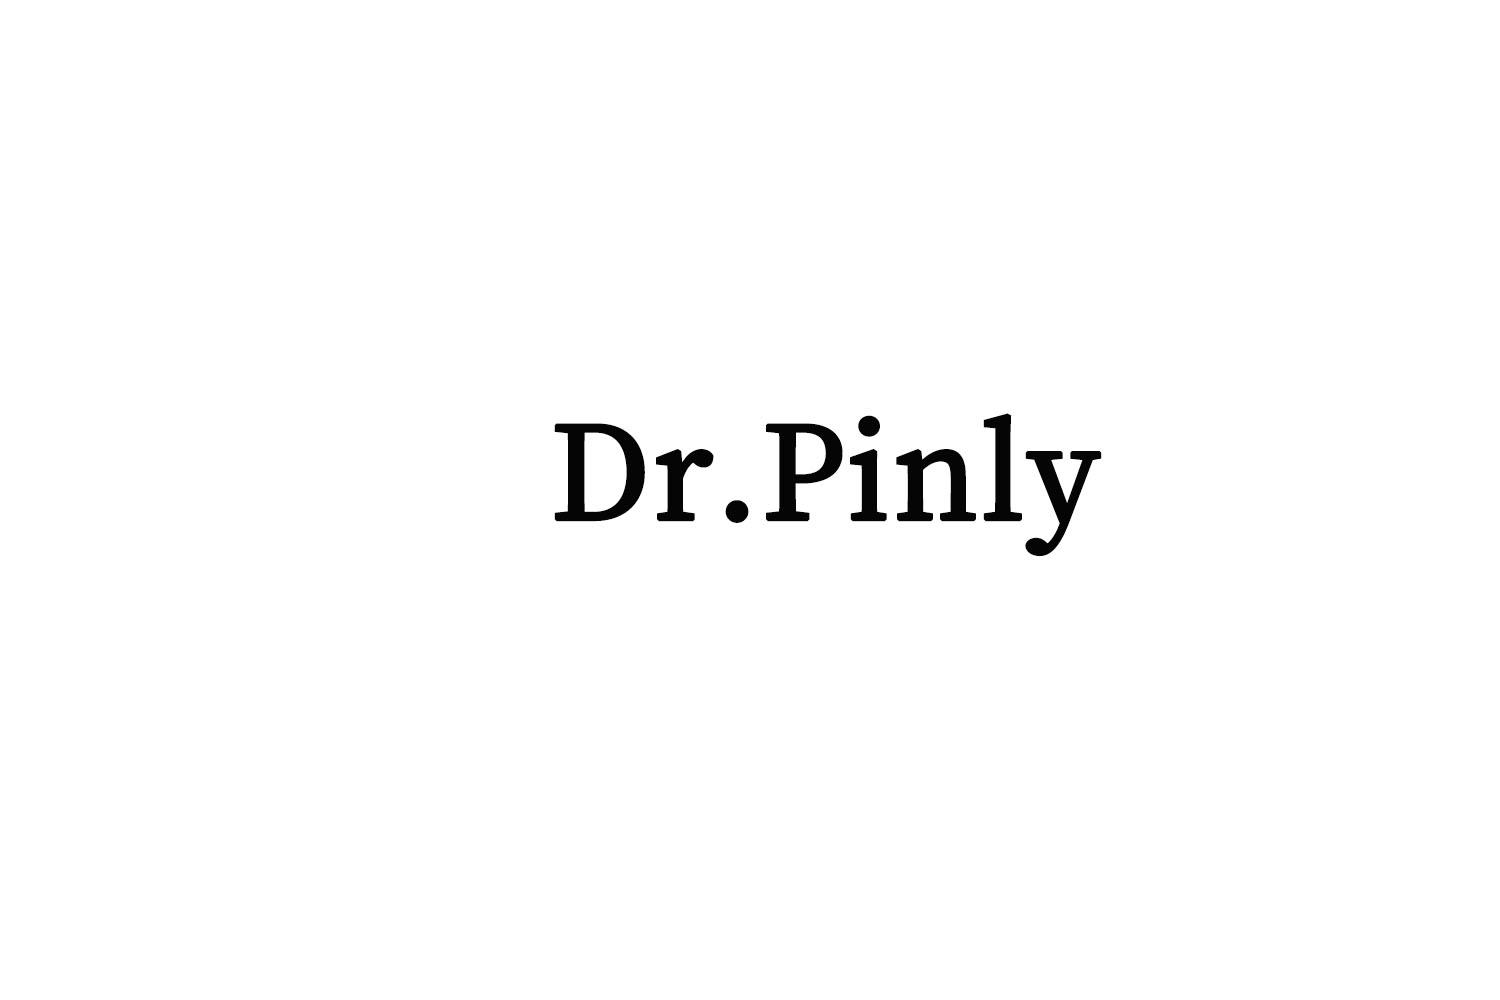 DR.PINLY